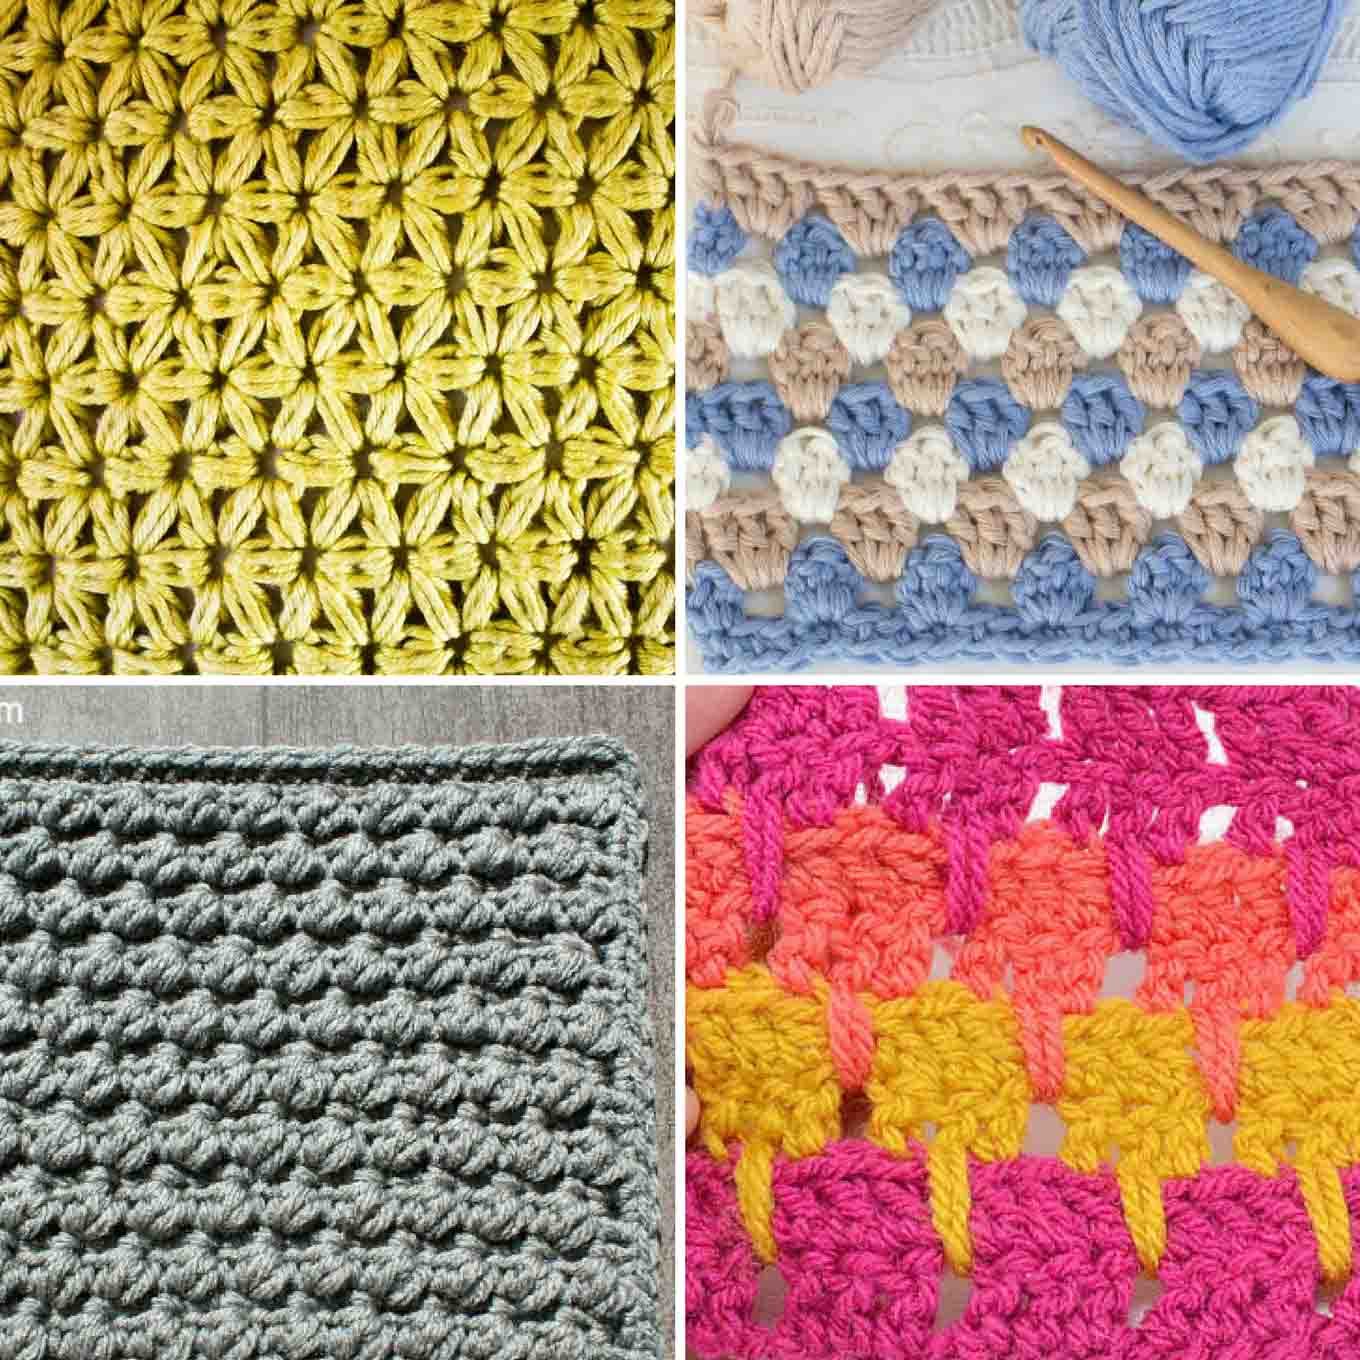 Beautiful Crochet Stitches For Blankets and Afghans